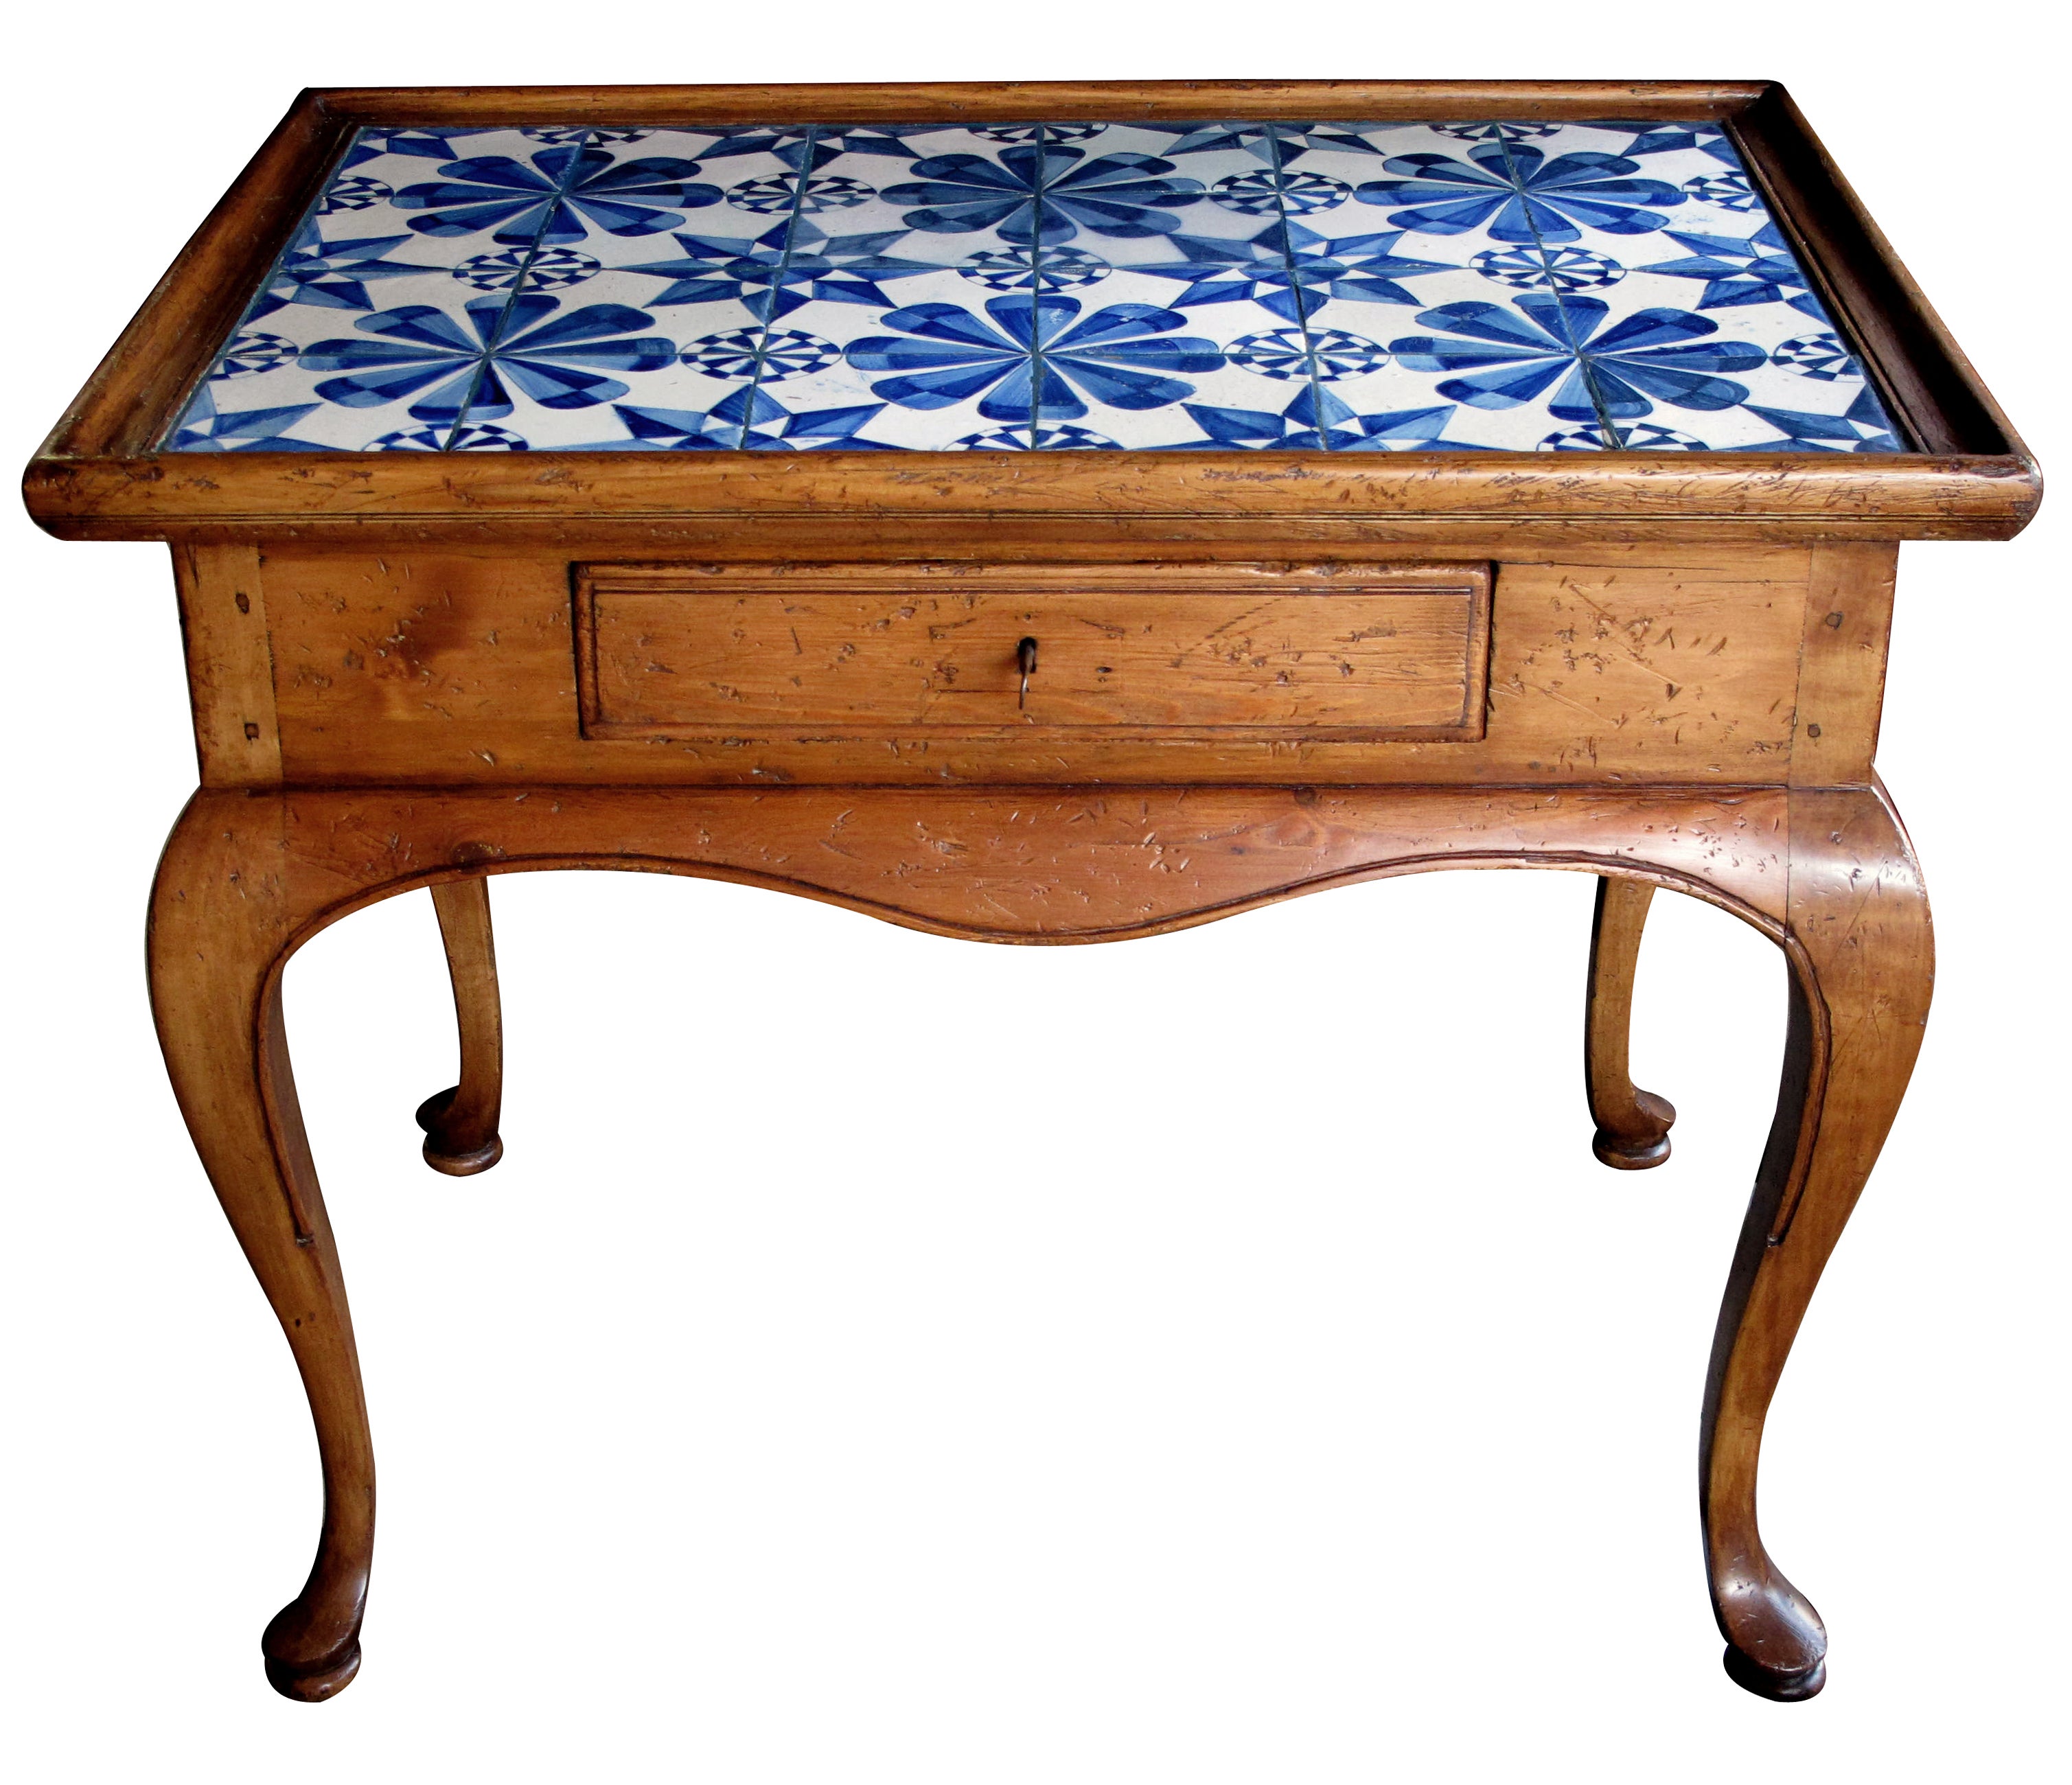 A Shapely Danish Rococo Style Stripped Pine Side Table w/Delft Tile Top